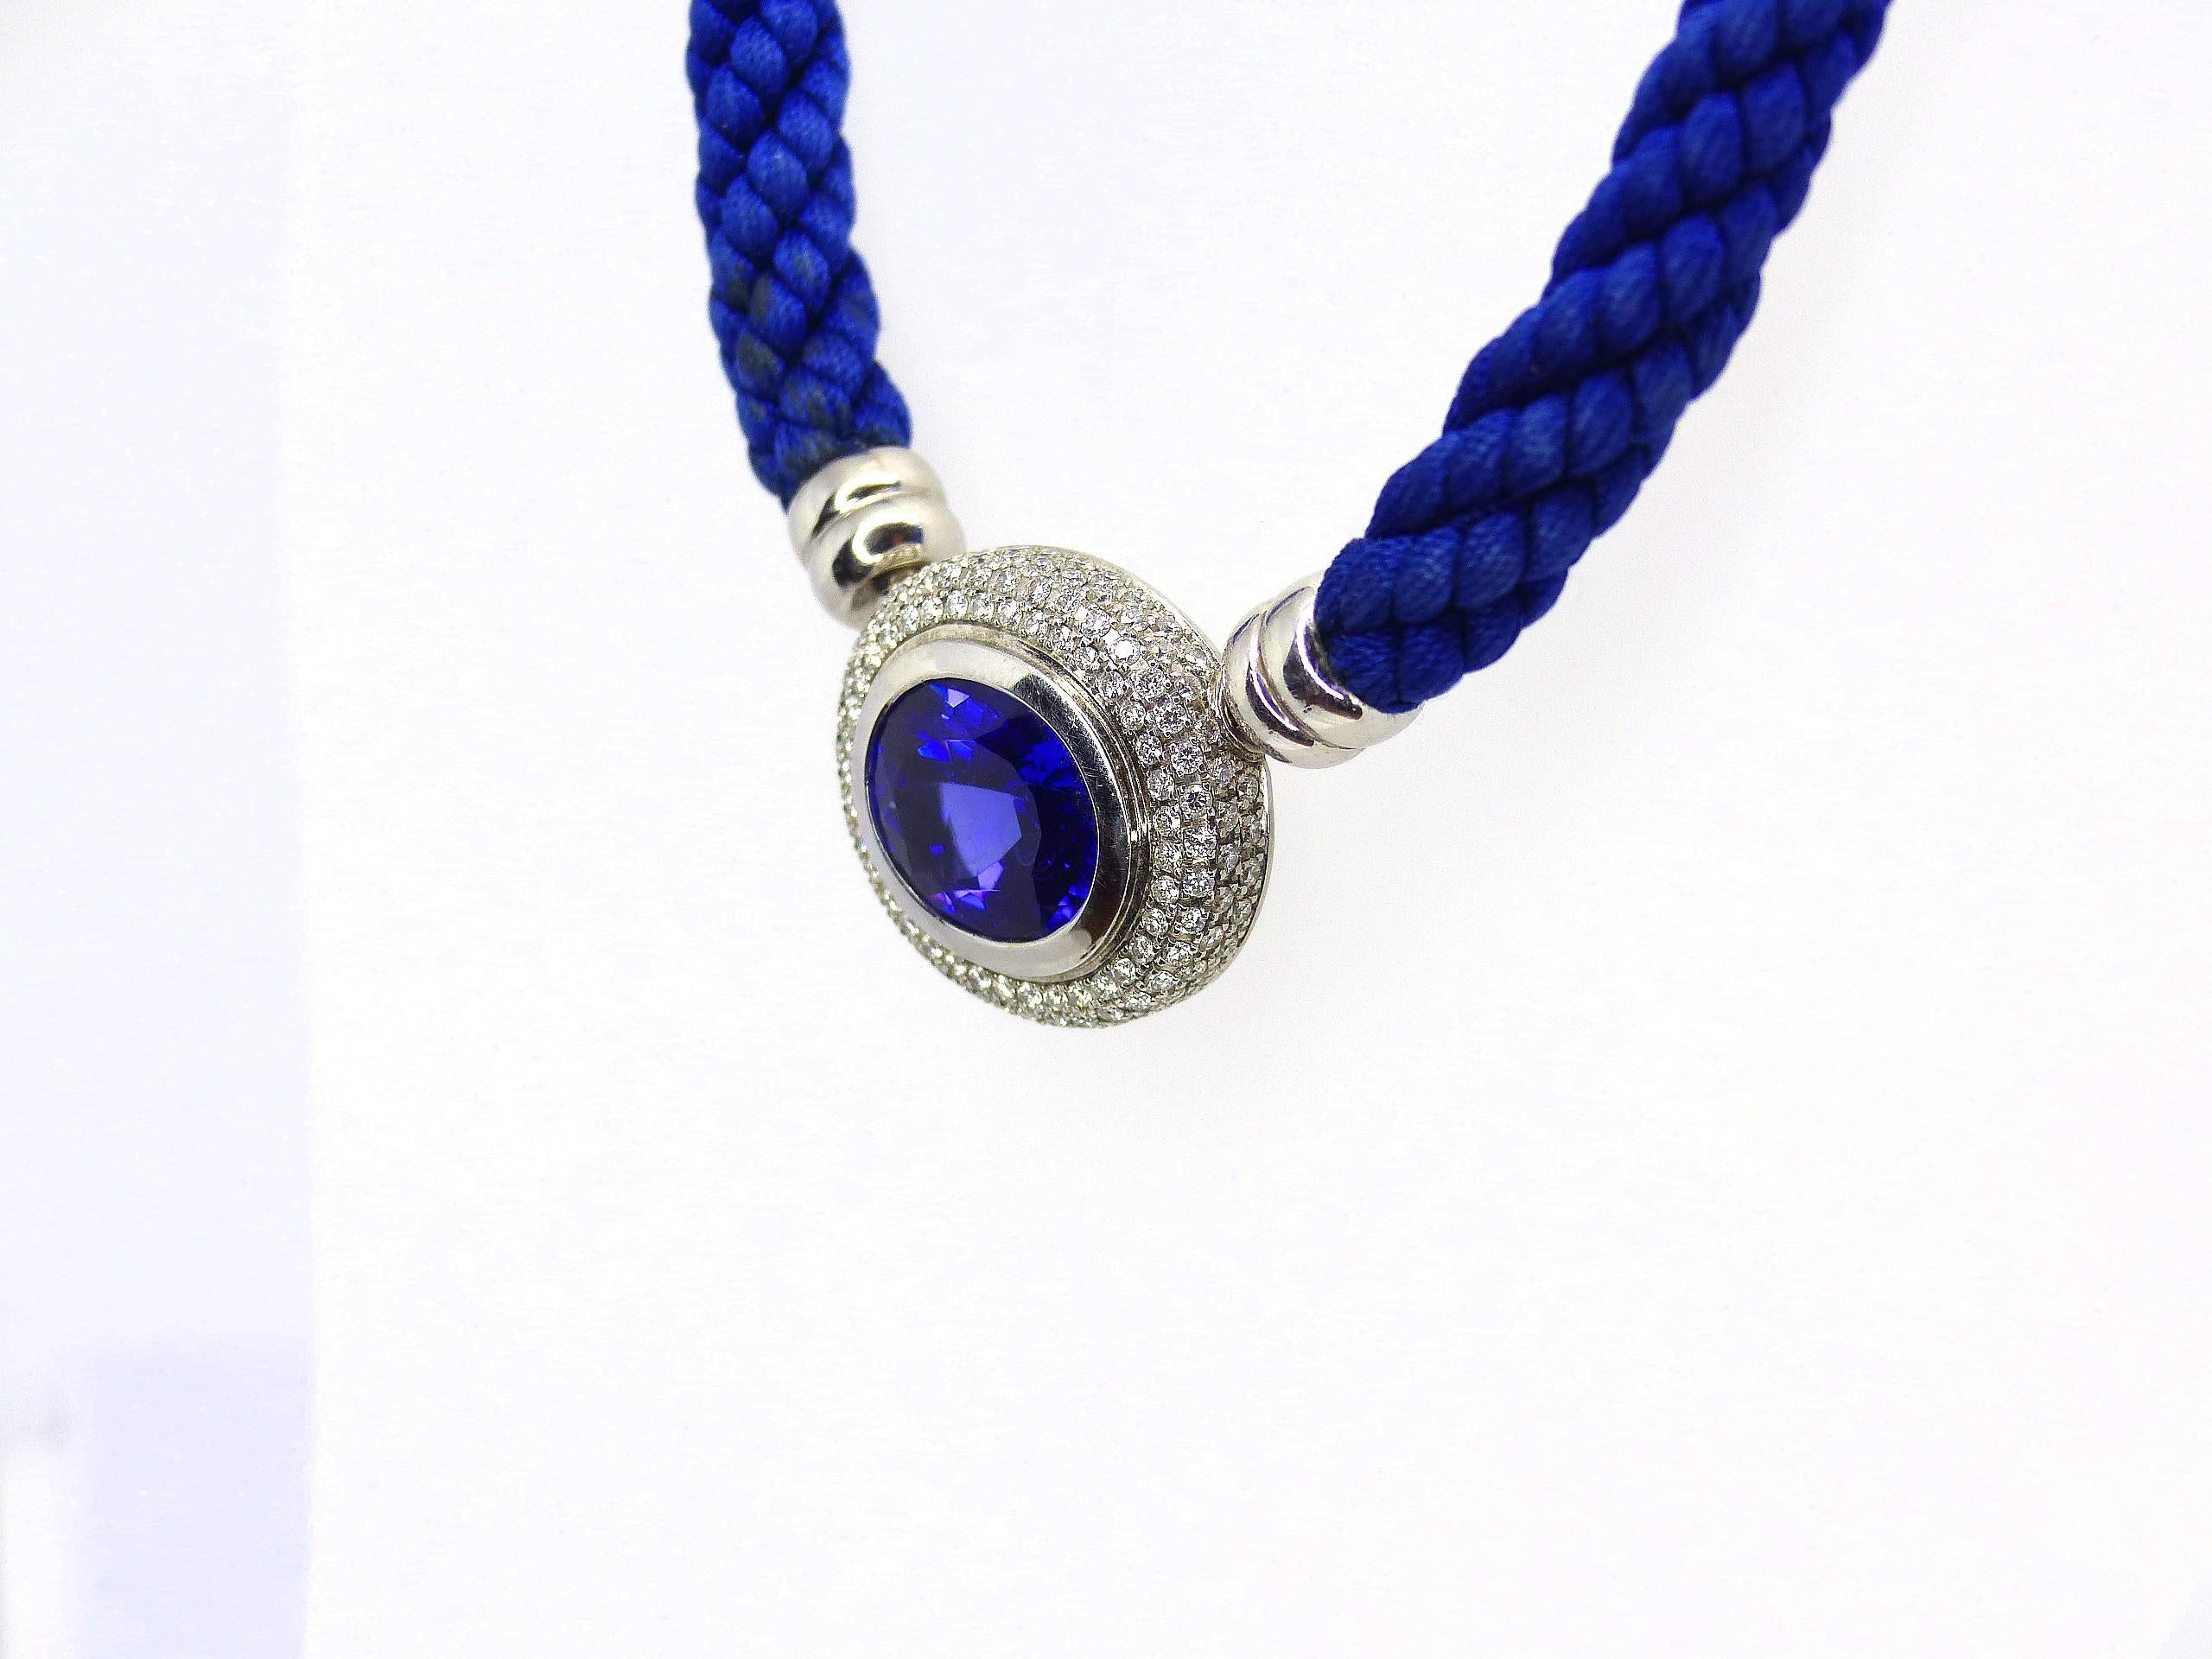 Thomas Leyser is renowned for his contemporary jewellery designs utilizing fine gemstones.

This 18k white gold (19g) clasp/pendant is set with 1x fine Tansanite in magnificient intensiv blue colour (oval, 16.3x13.6mm, 10.14ct) + 140x Diamonds